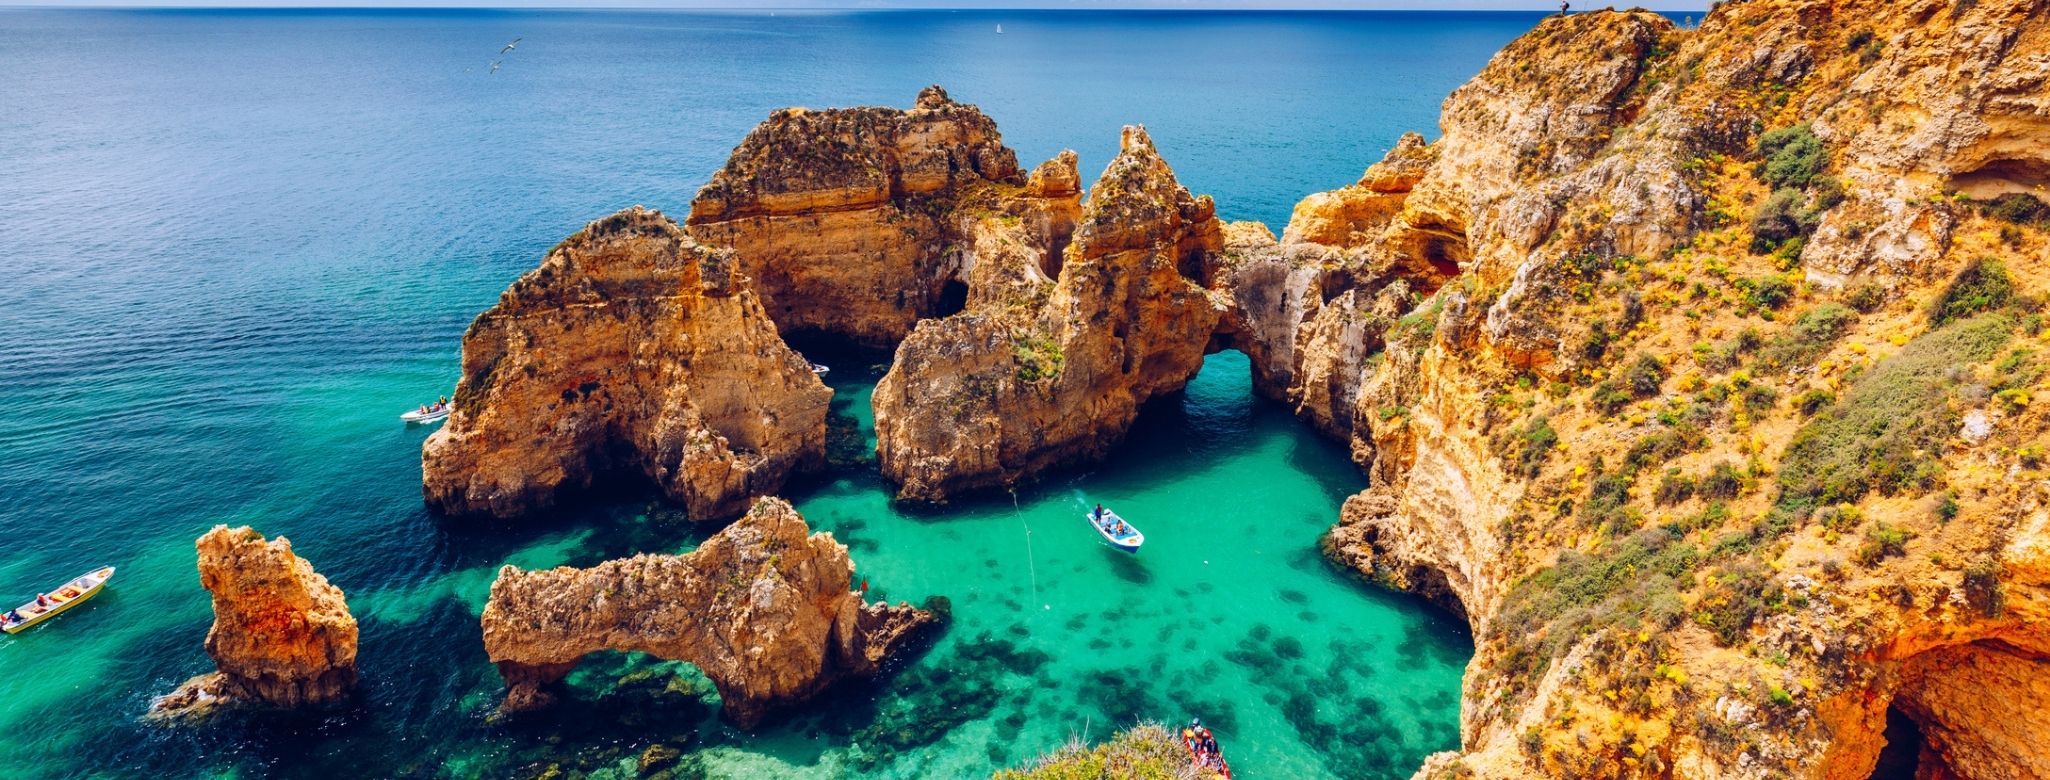 All About Sailing in Algarve - The Nautal blog | All the information about  boat rental